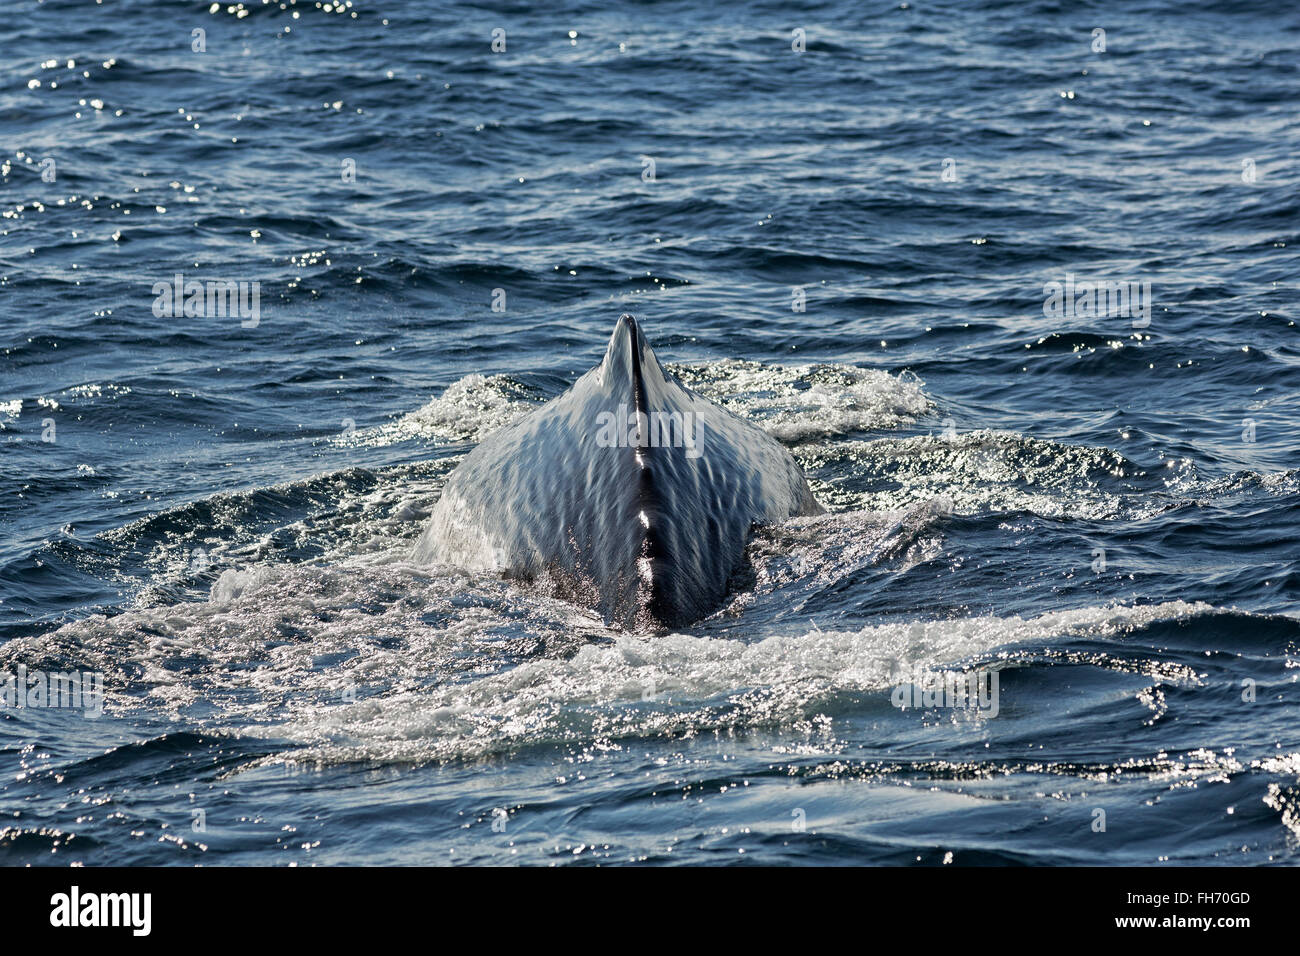 Le cachalot (Physeter macrocephalus syn. Physeter catodon), retour, bull diving off Andenes, Andøy, d'Andøya, Norvège Vesteralen, Banque D'Images